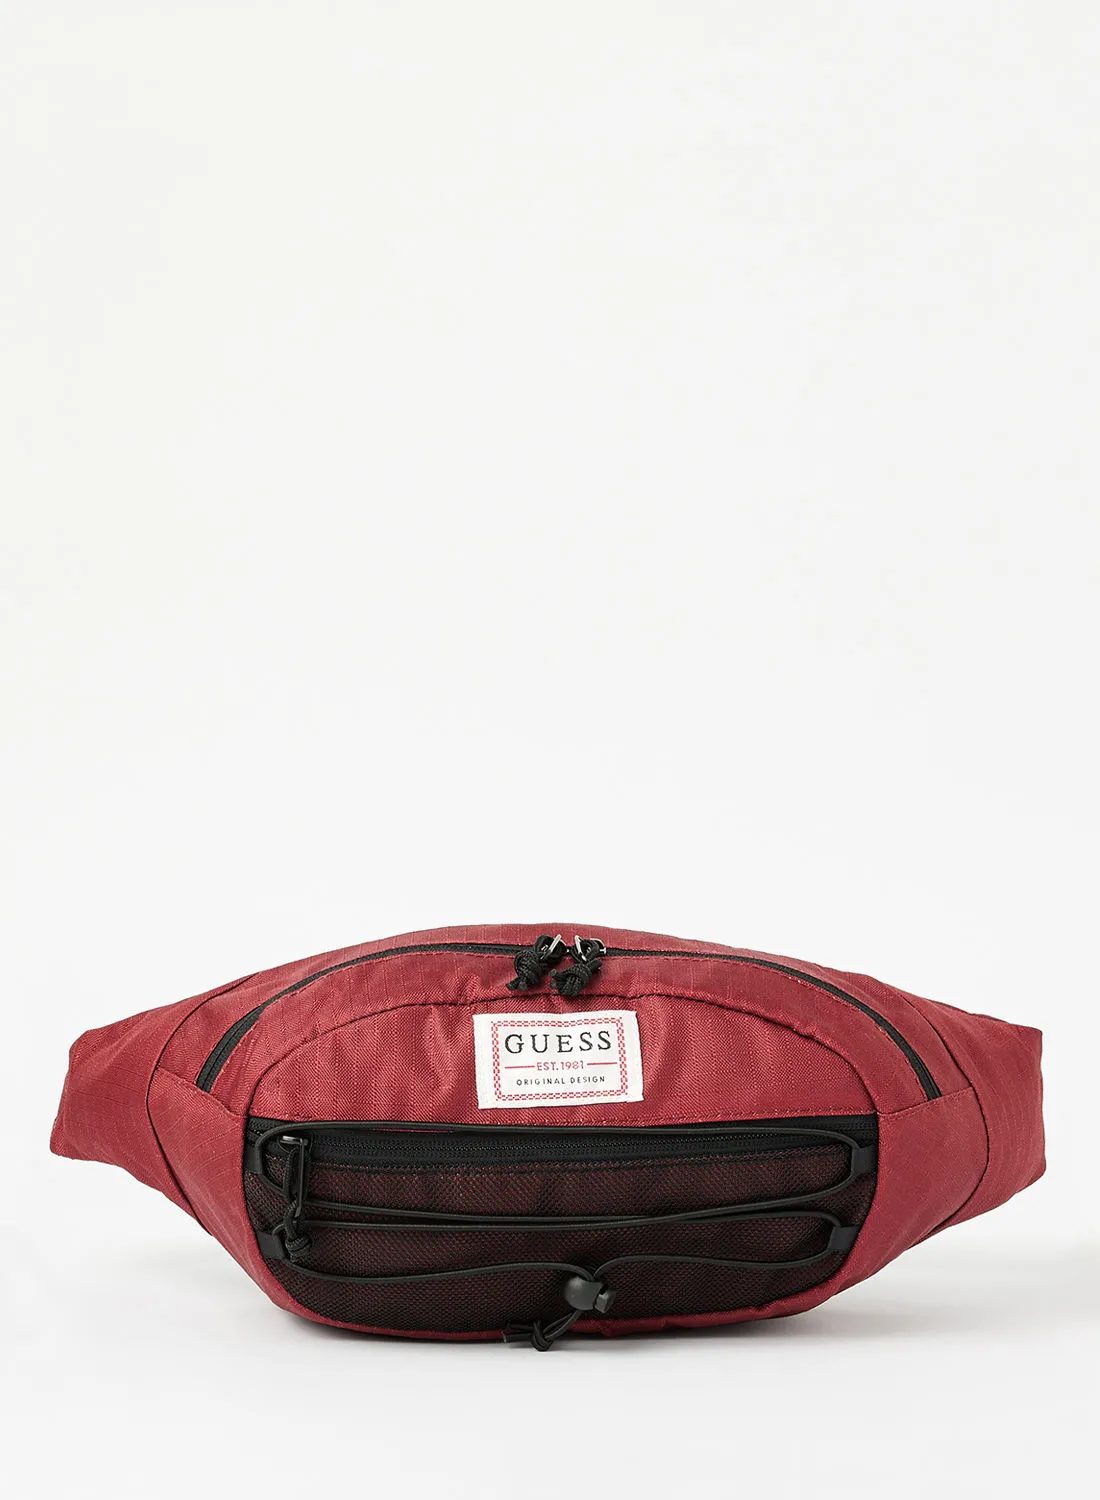 GUESS Expedition Waist Pack Maroon